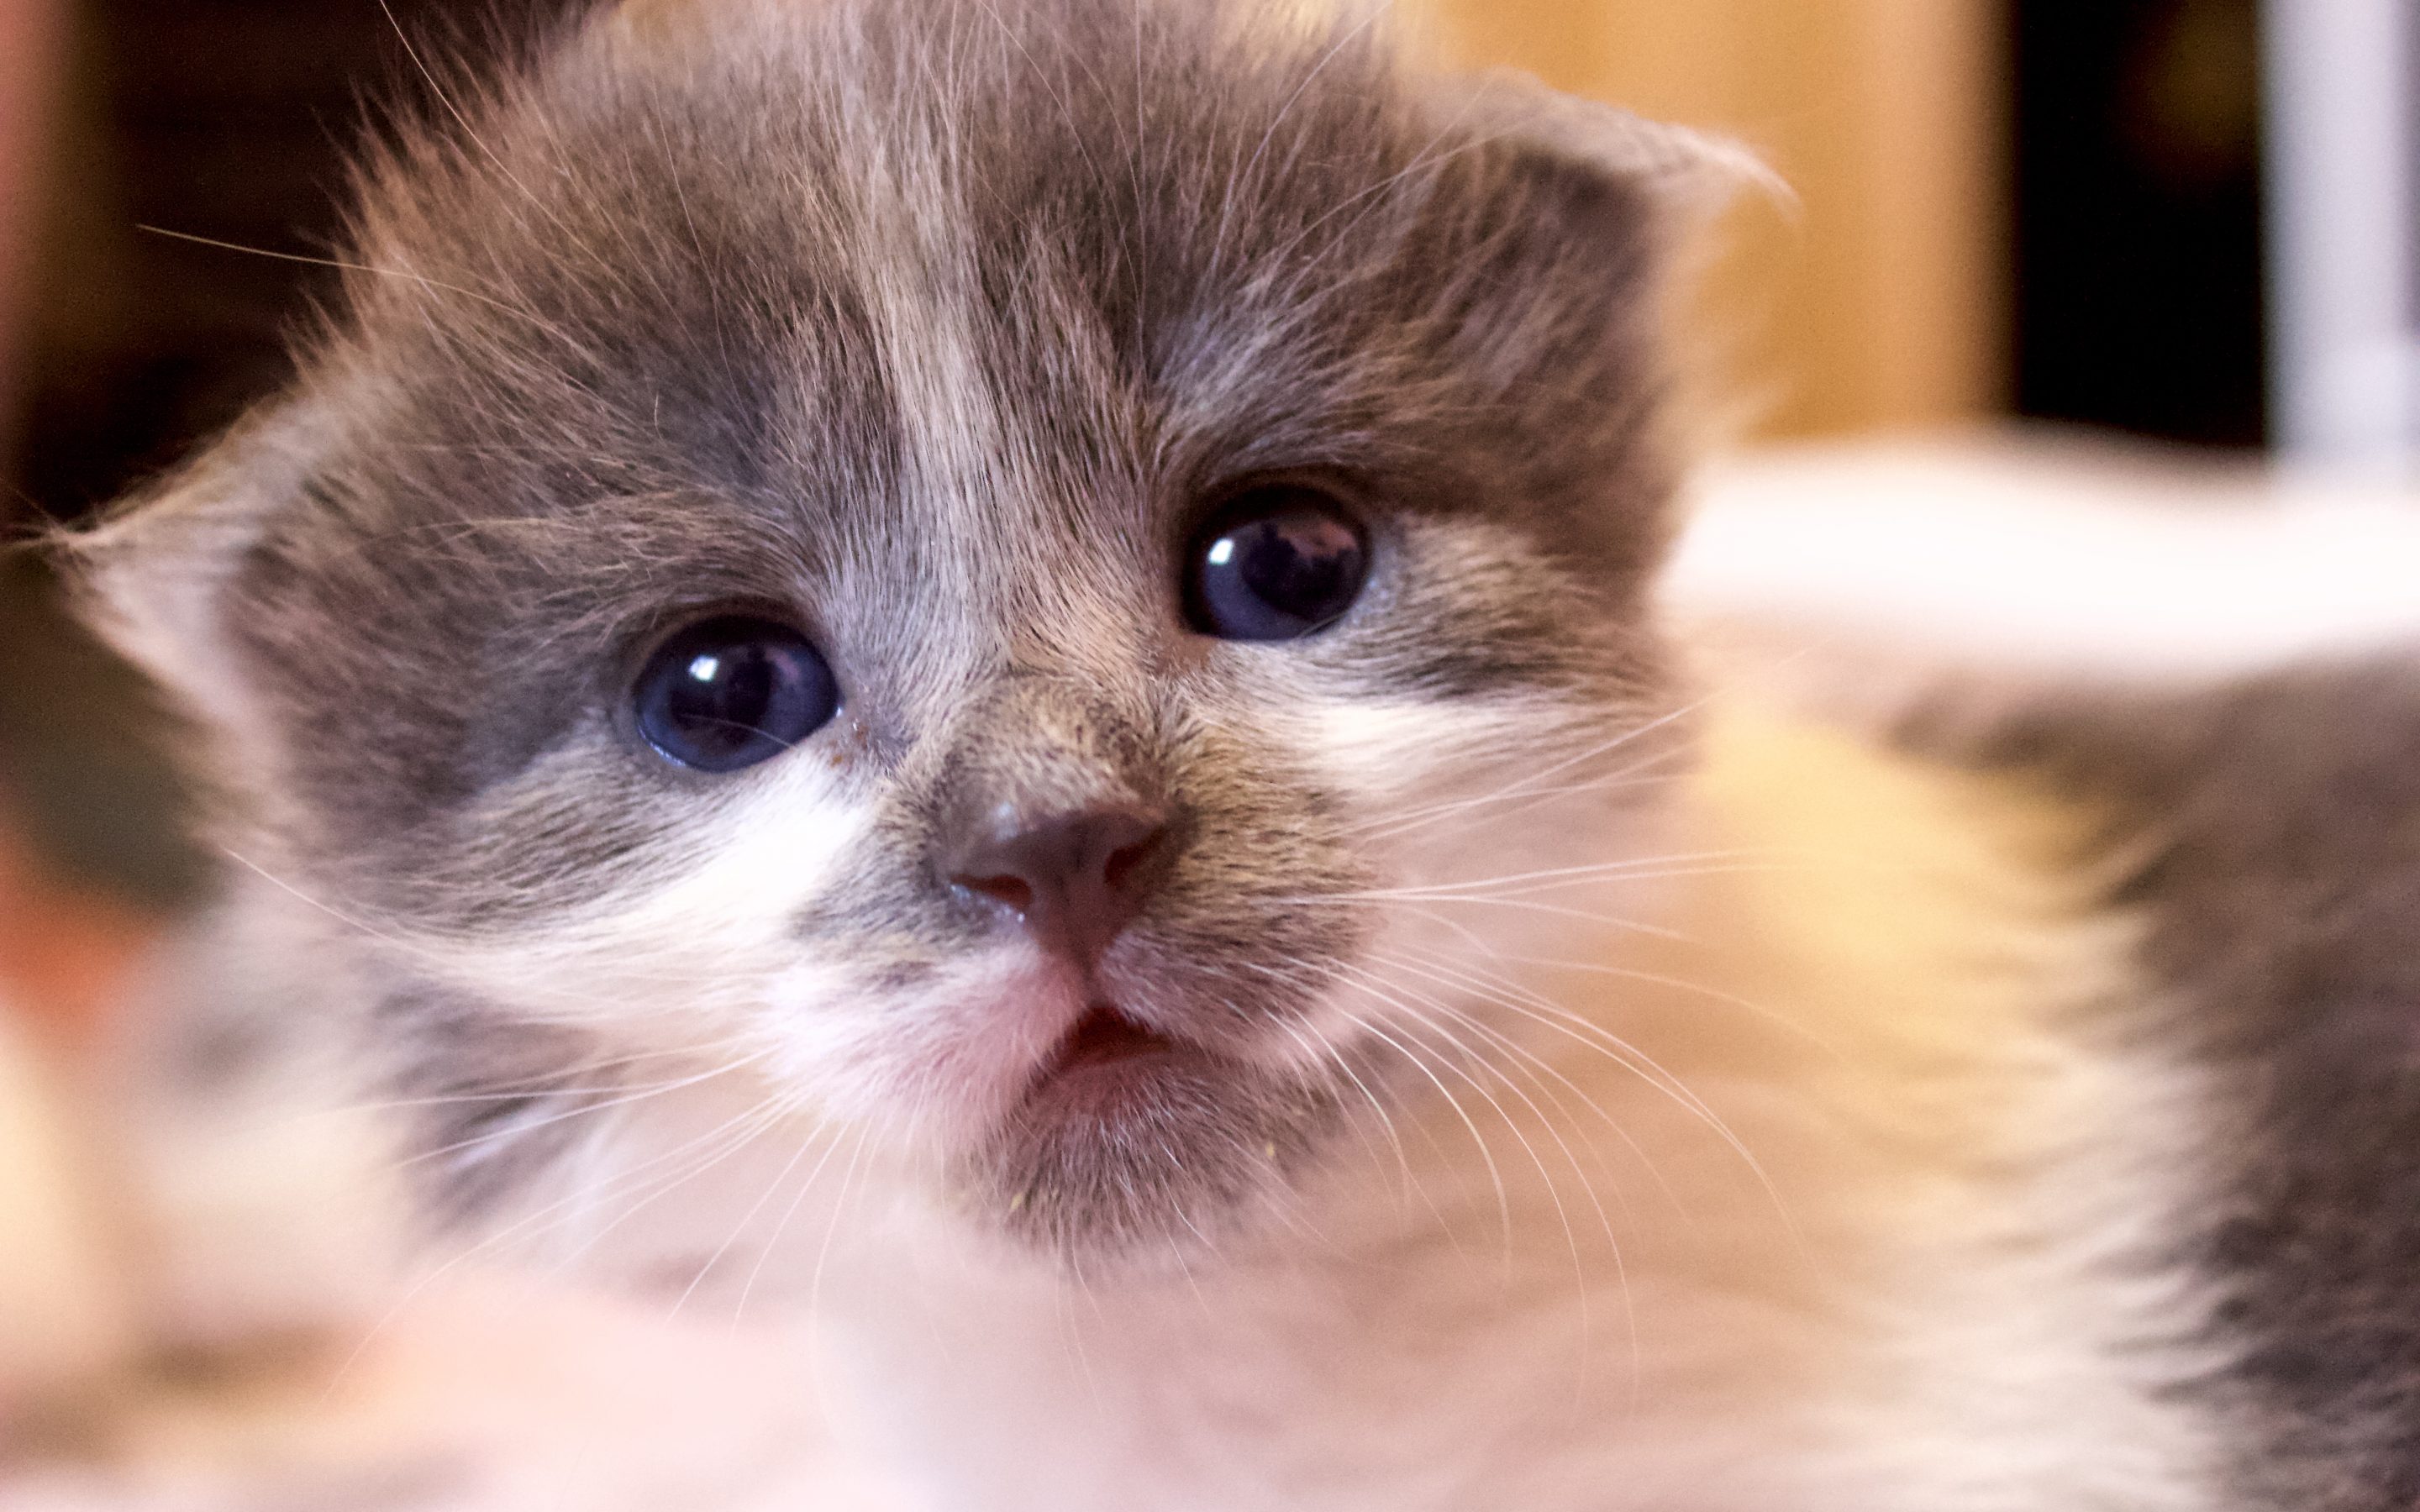 Frijole, a 2-week-old bottle baby kitten, is being raised in a Roice-Hurst foster home.